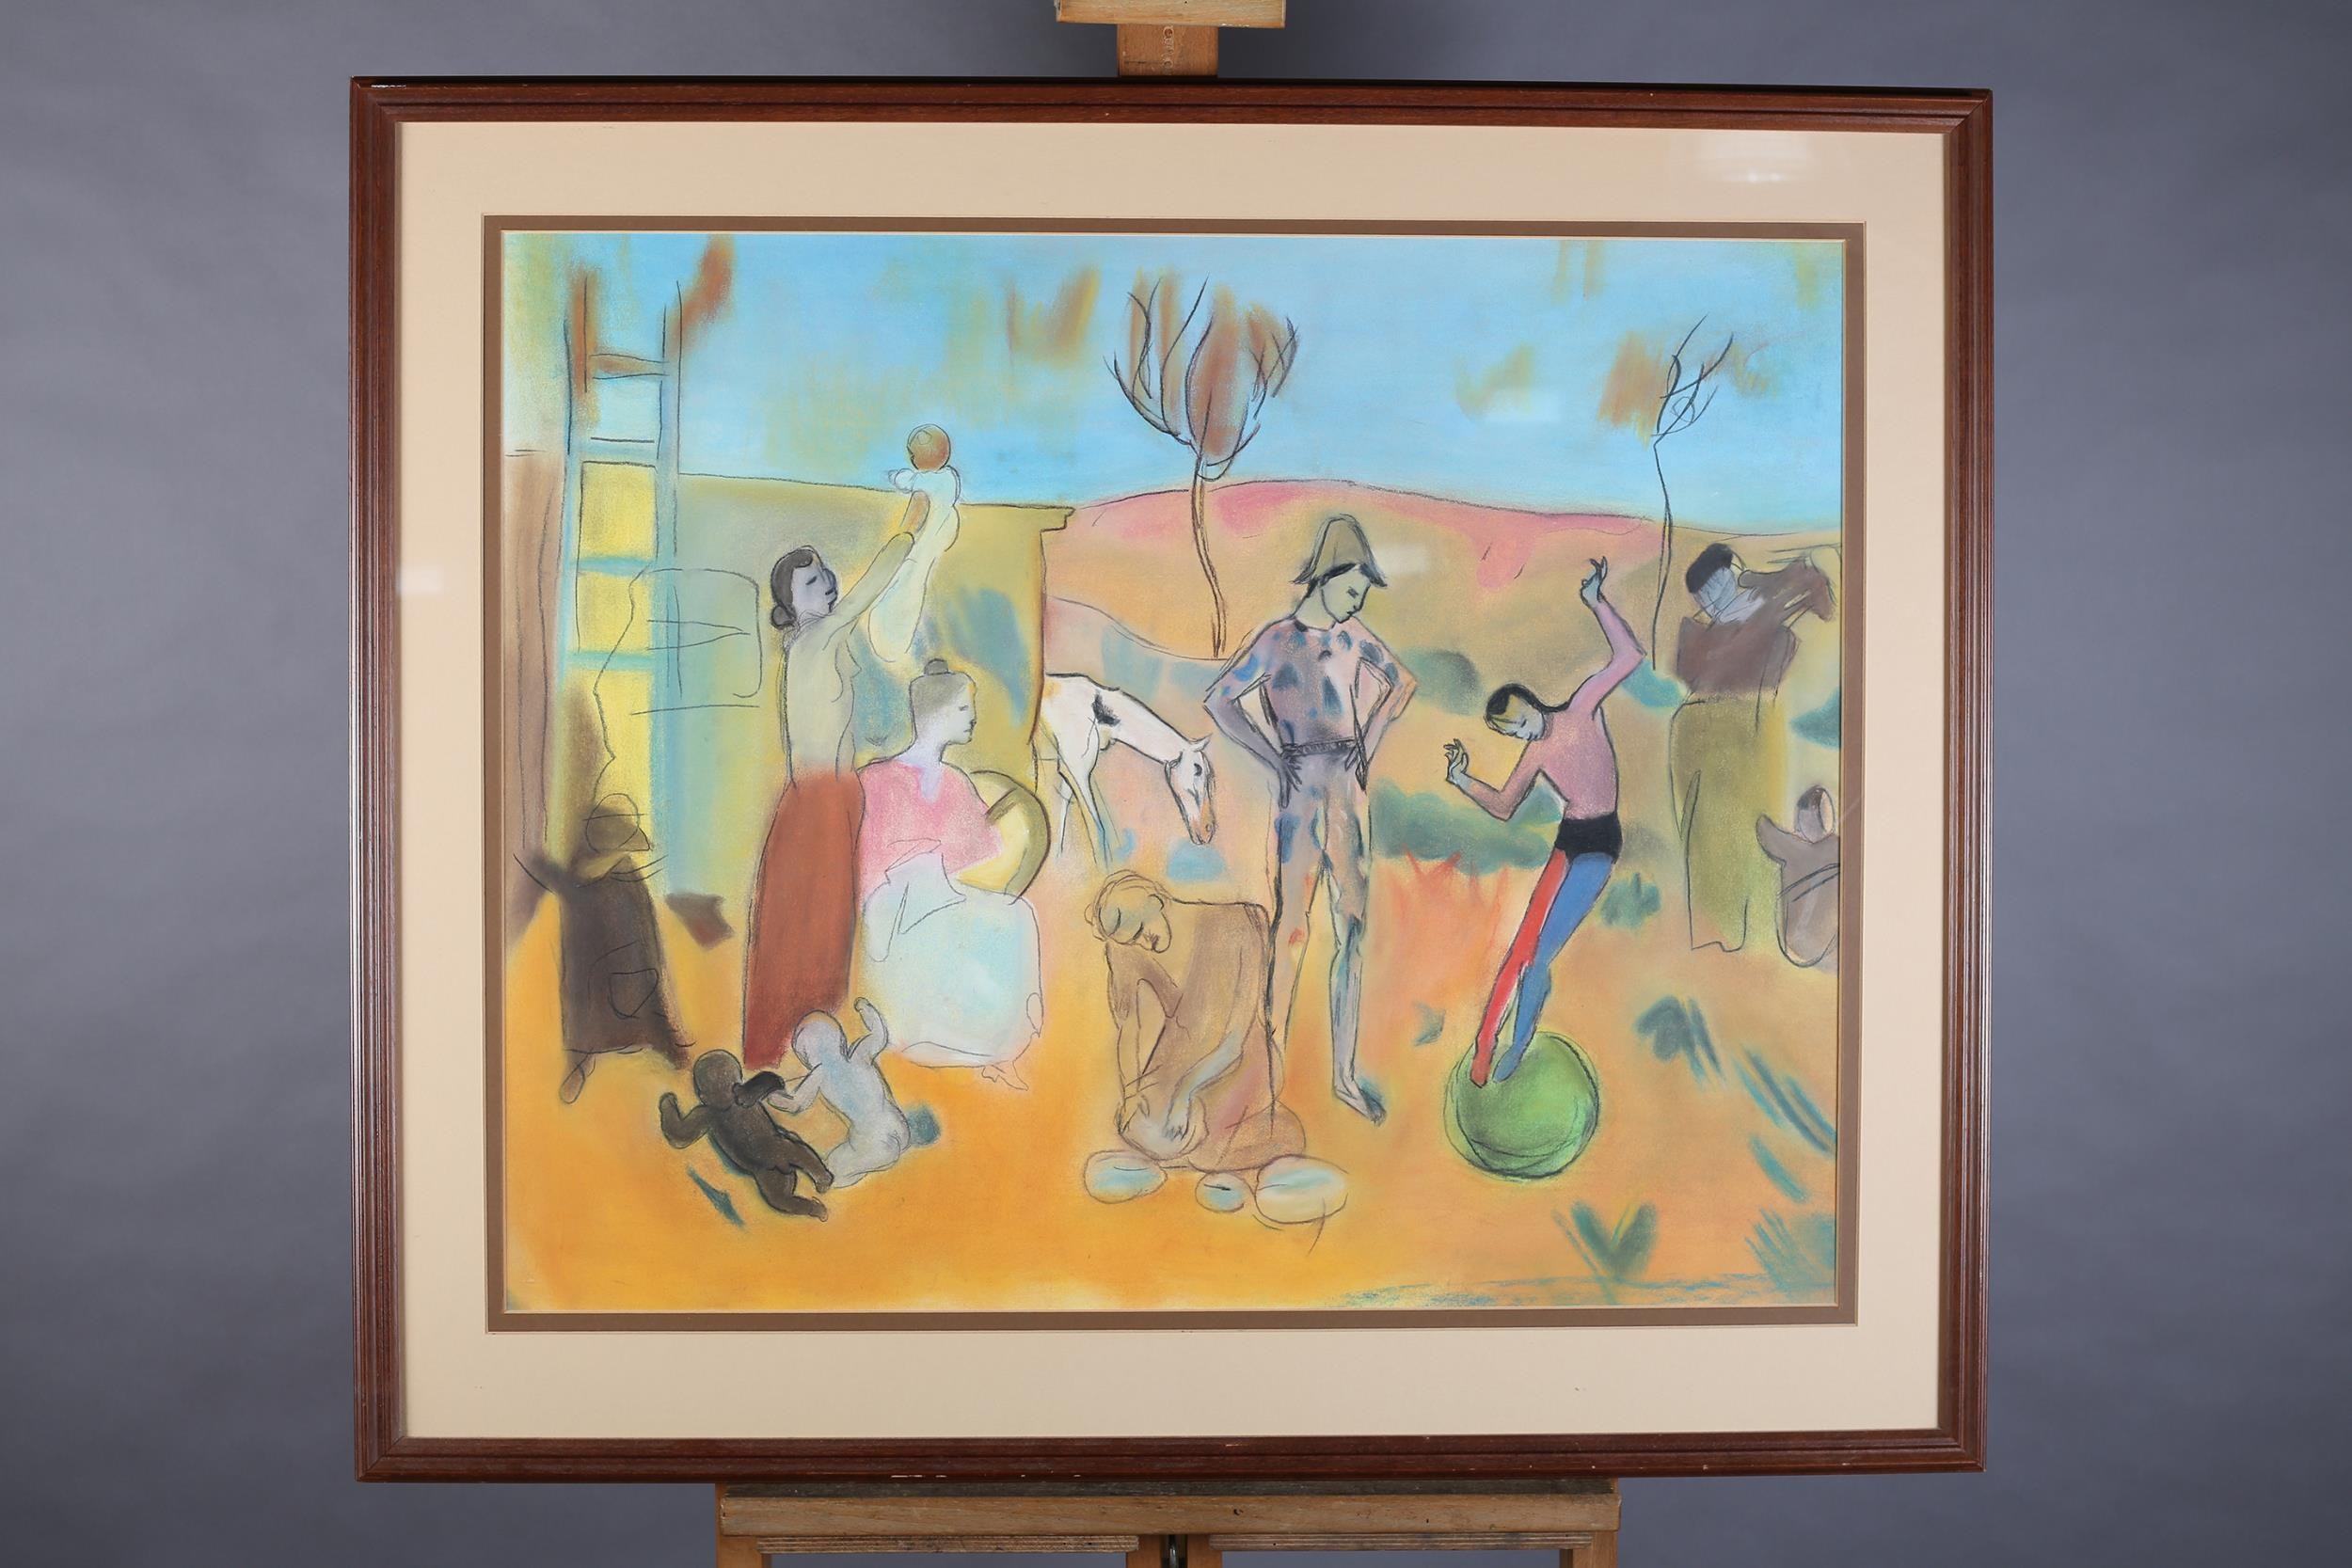 After Picasso, Circus Family, pastel, unsigned, 57cm x 72cm, the original dated 1905 by Pablo